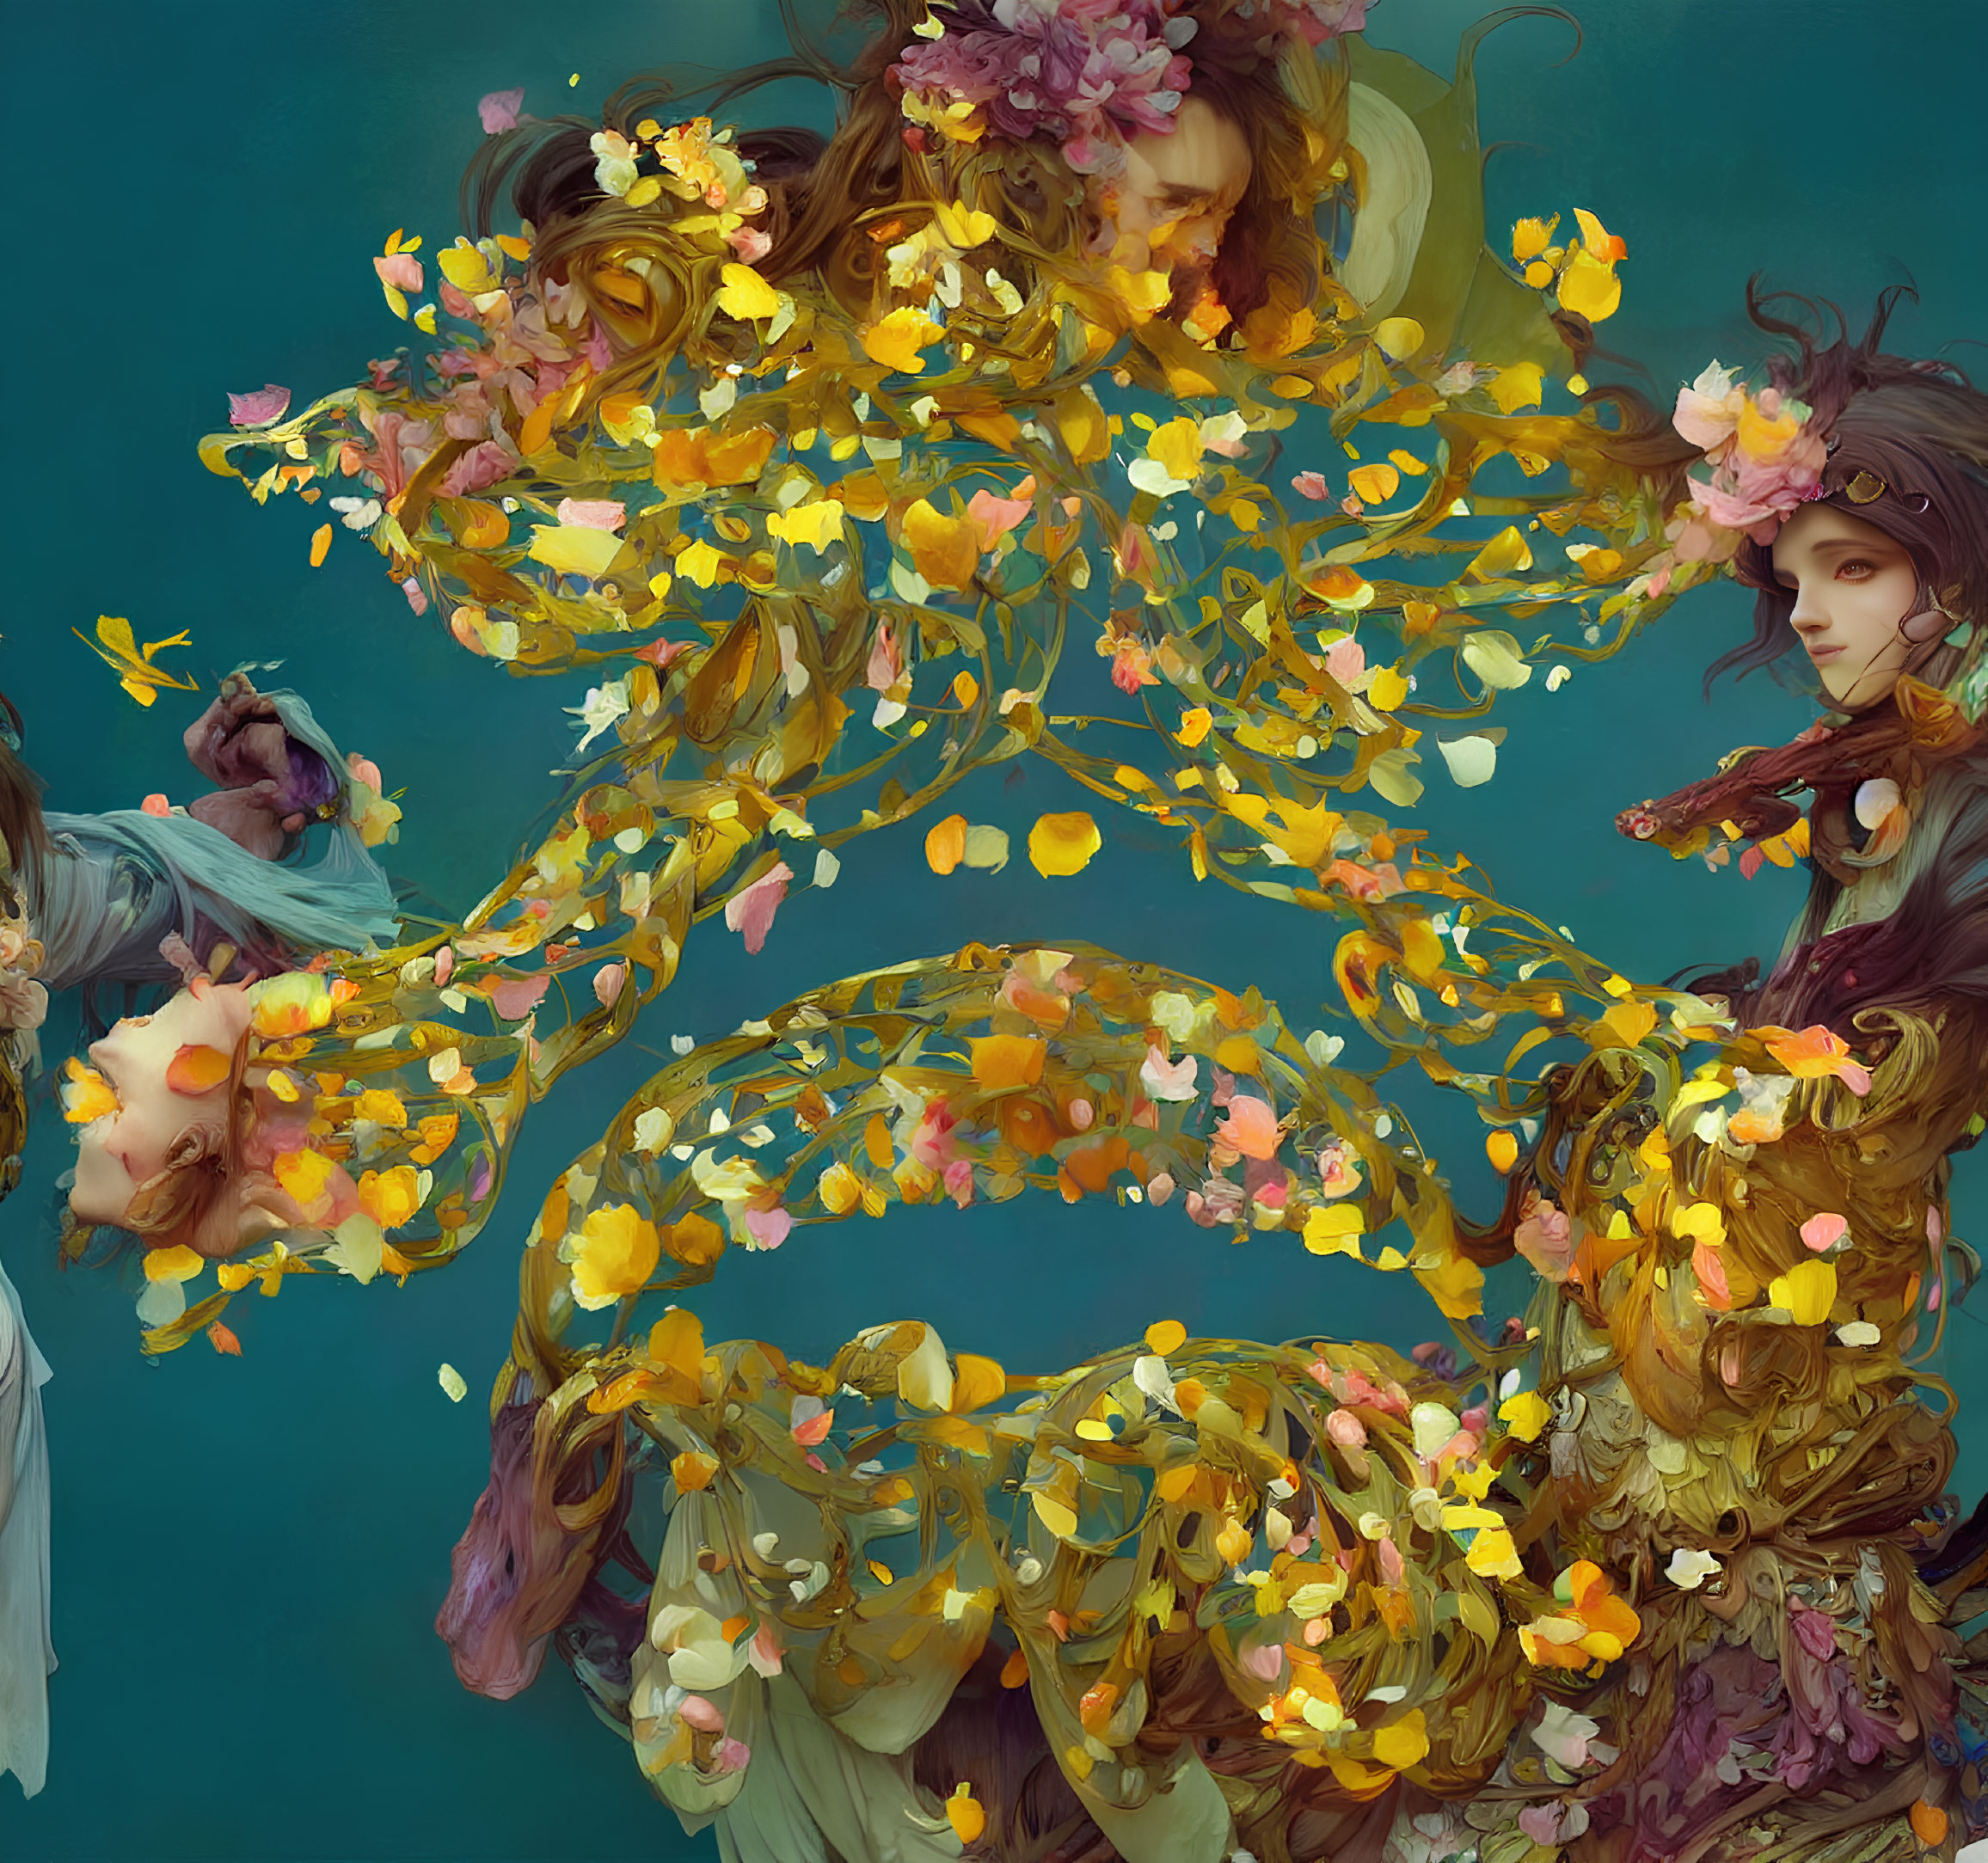 Two women in swirling floral designs on teal background, autumnal leaves and vibrant flowers blend in ethereal